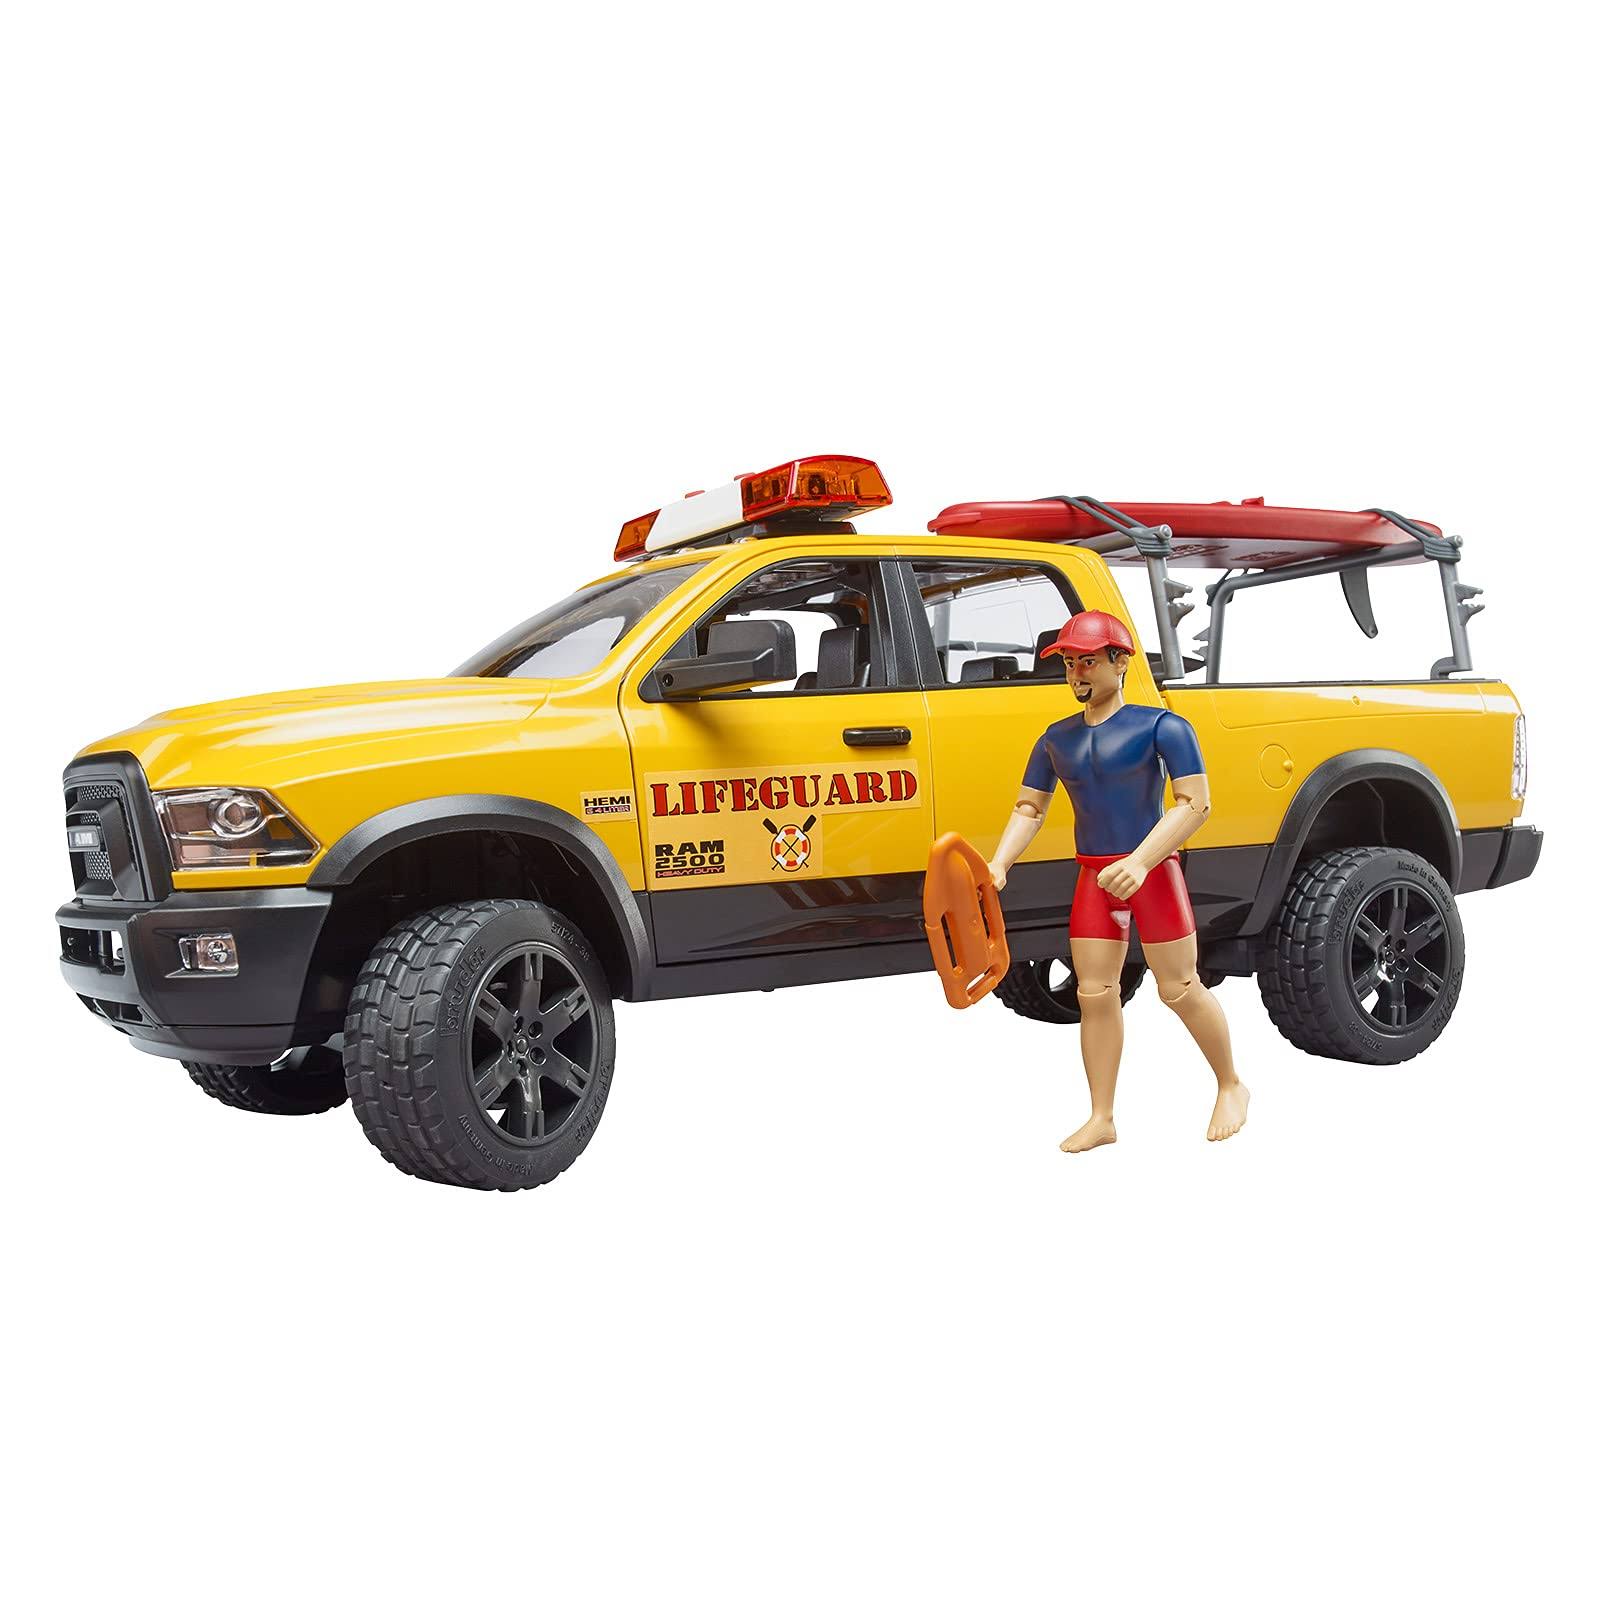 Bruder Ram 2500 Power Wagon Life Guard with Figure, Stand Up Paddle, L&S Module